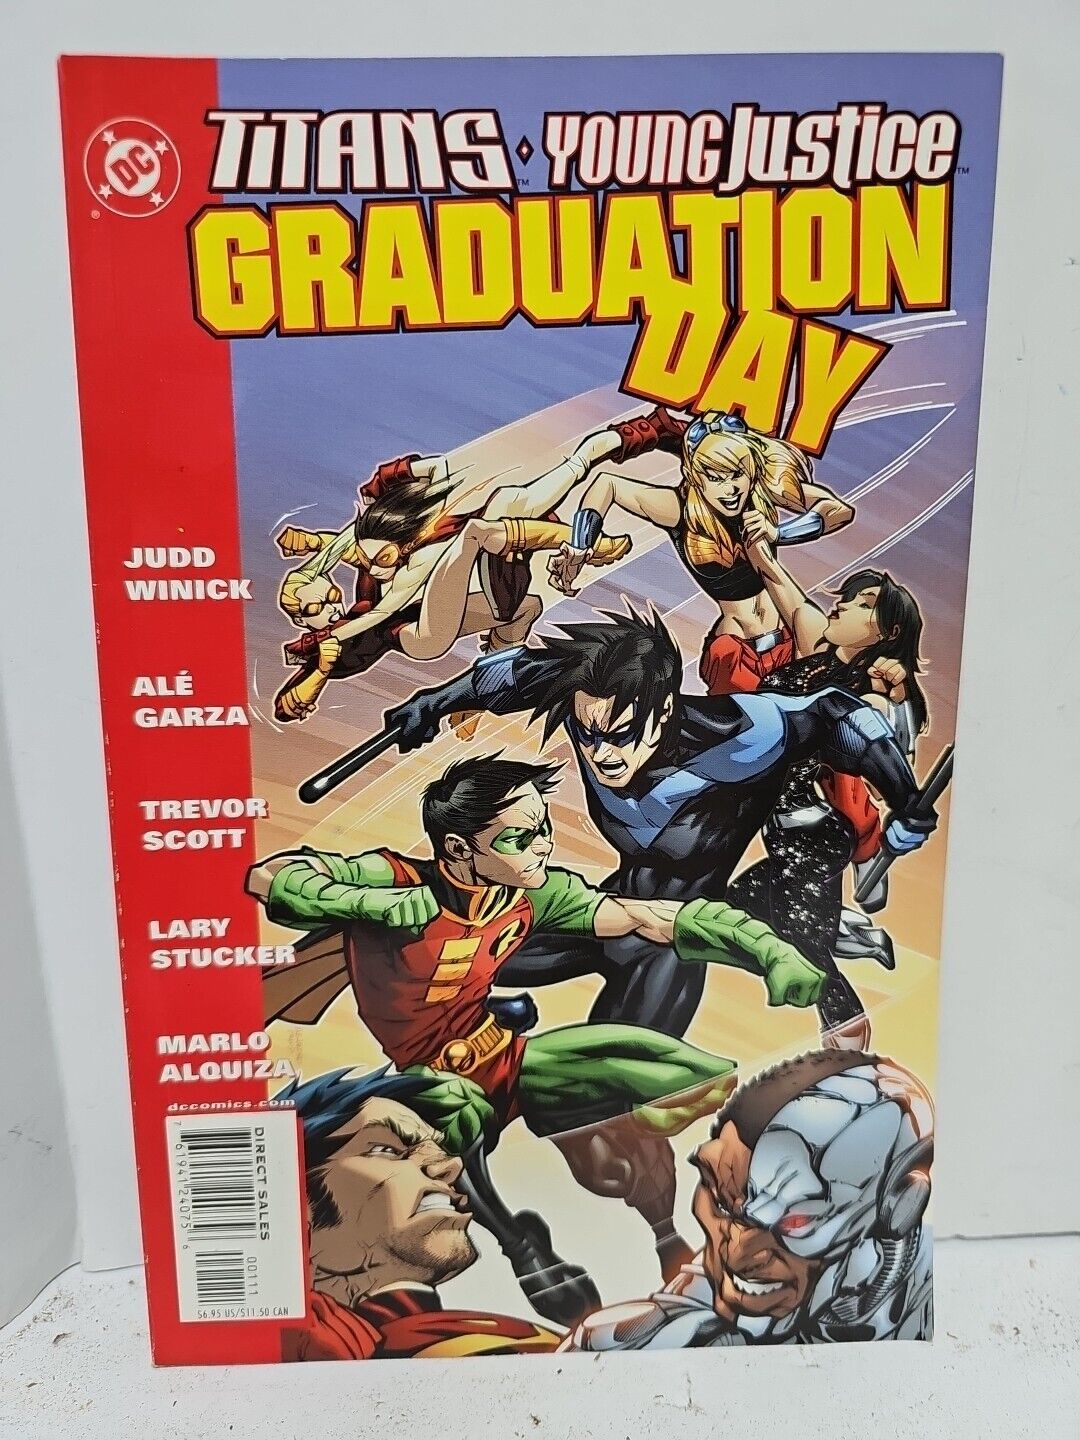 TITANS * YOUNG JUSTICE : GRADUATION DAY    